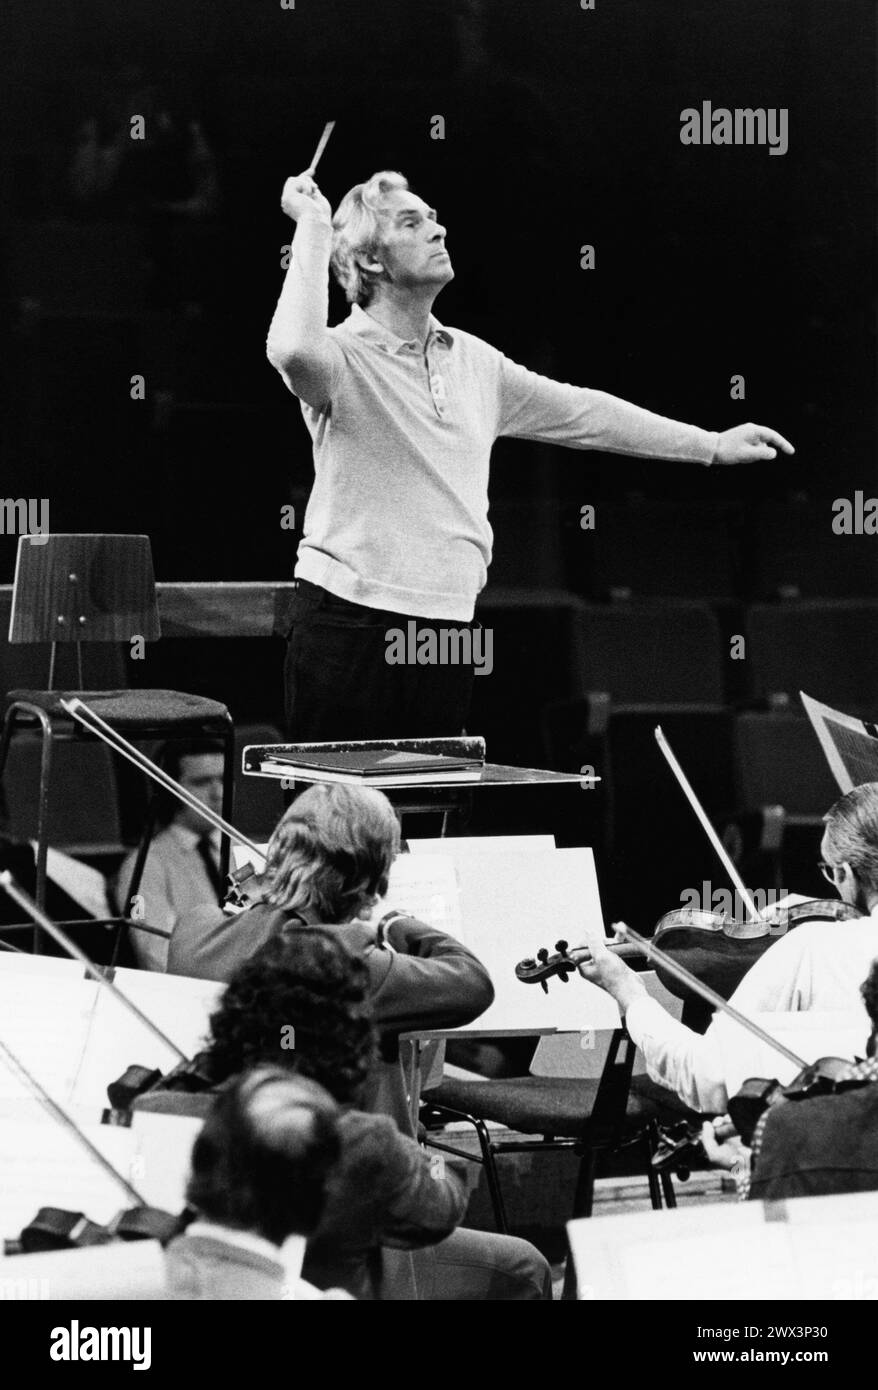 Rudolf Kempe (German orchestral conductor, 1910-1976) rehearsing with the Royal Philharmonic Orchestra (RPO) at the Royal Festival Hall (RFH), Southbank Centre, London SE1 in 1972 Stock Photo